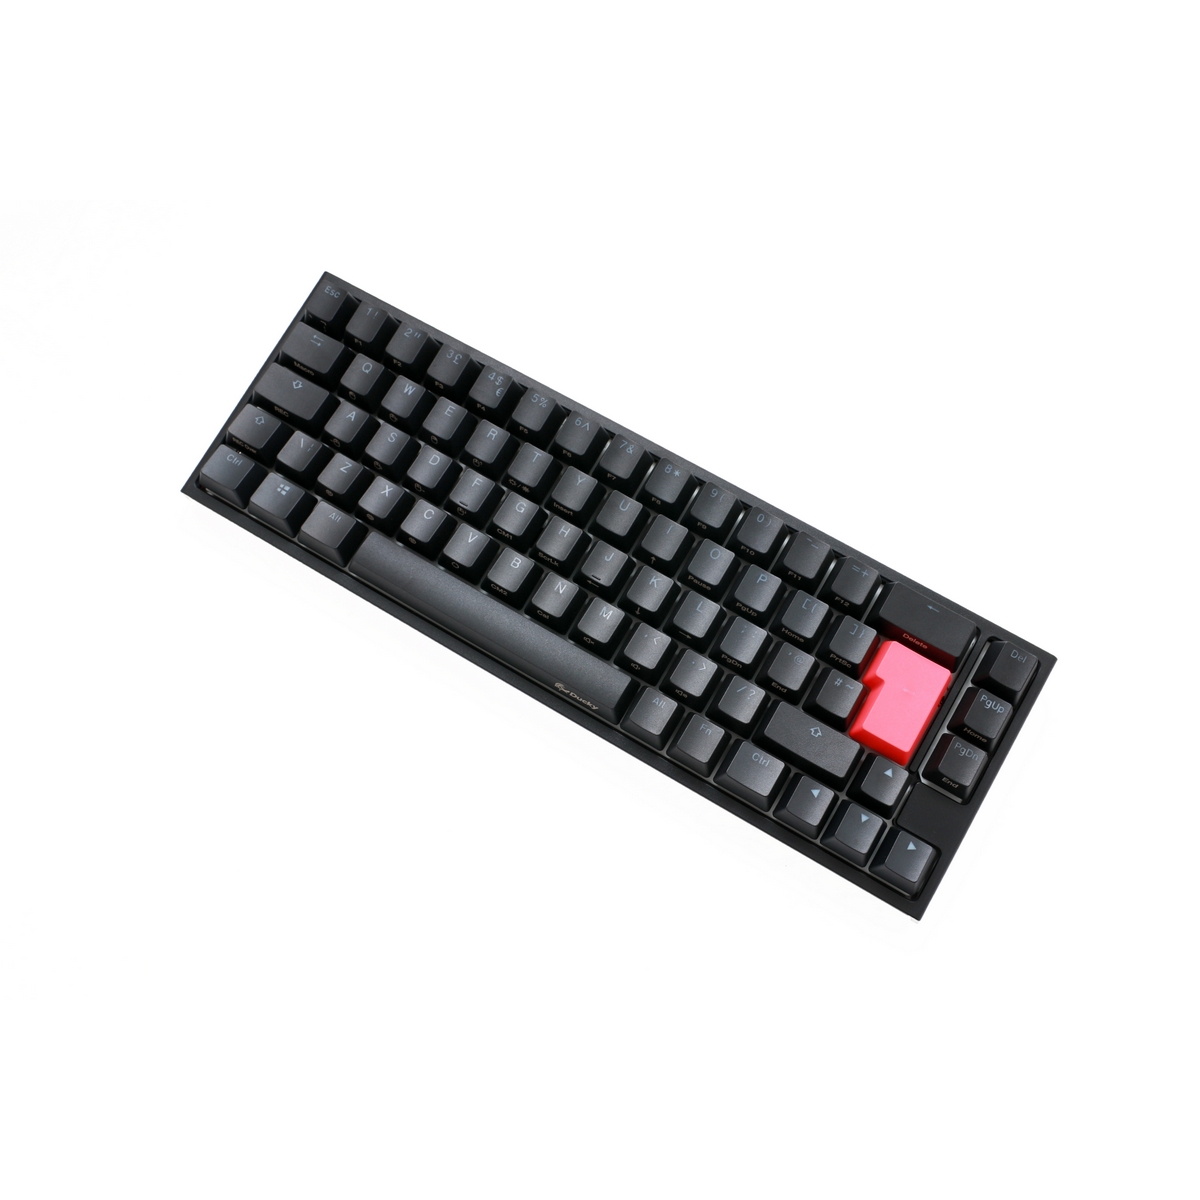 Ducky - Ducky One 2 SF 65% RGB Backlit Brown Cherry MX Switch Mechanical USB Gaming Keyboard UK Layout